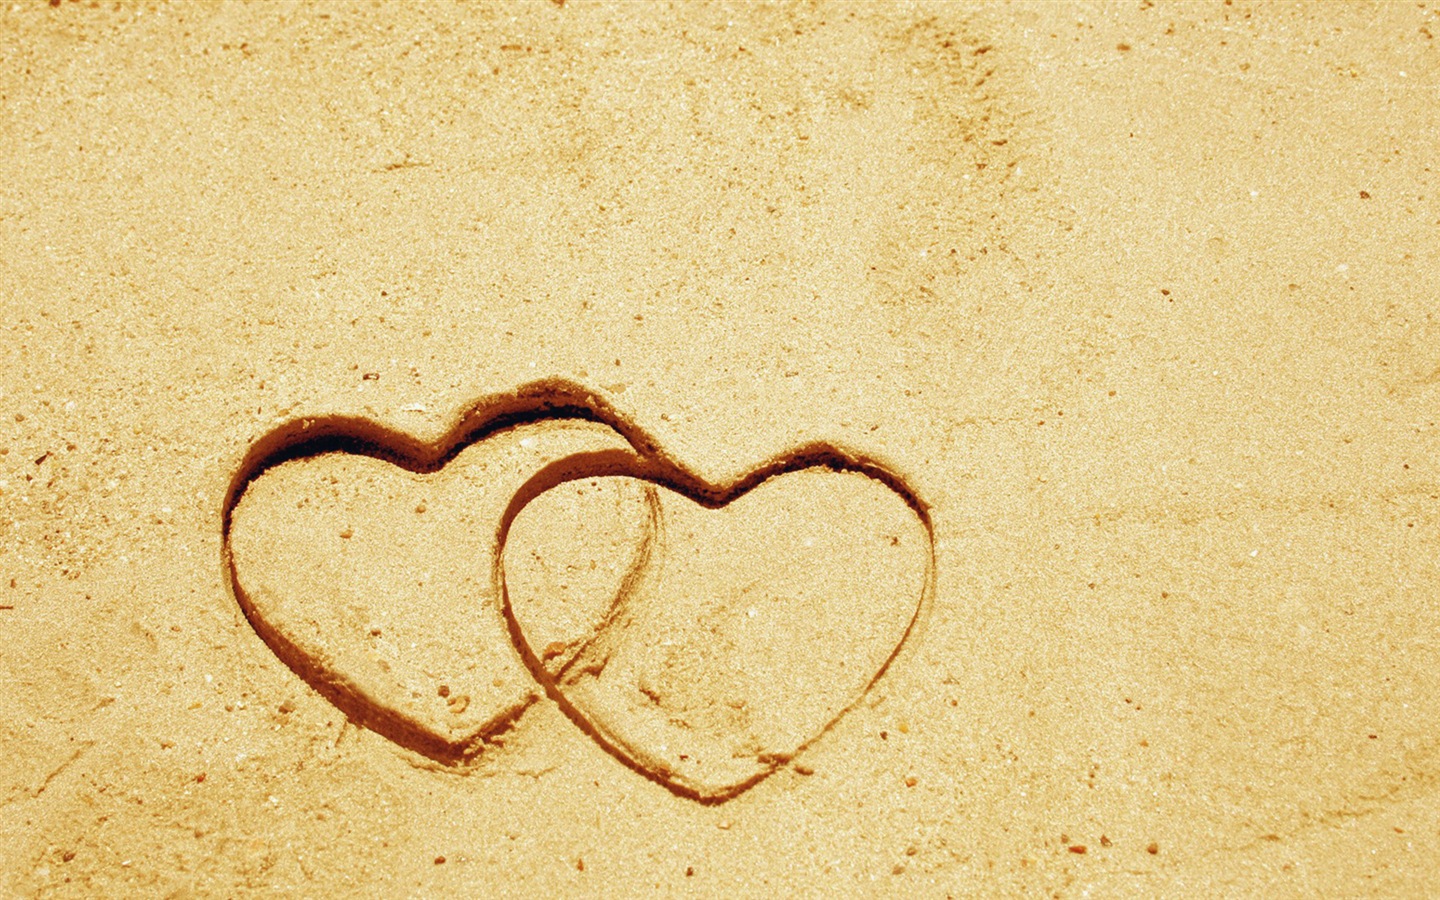 The theme of love, creative heart-shaped HD wallpapers #15 - 1440x900